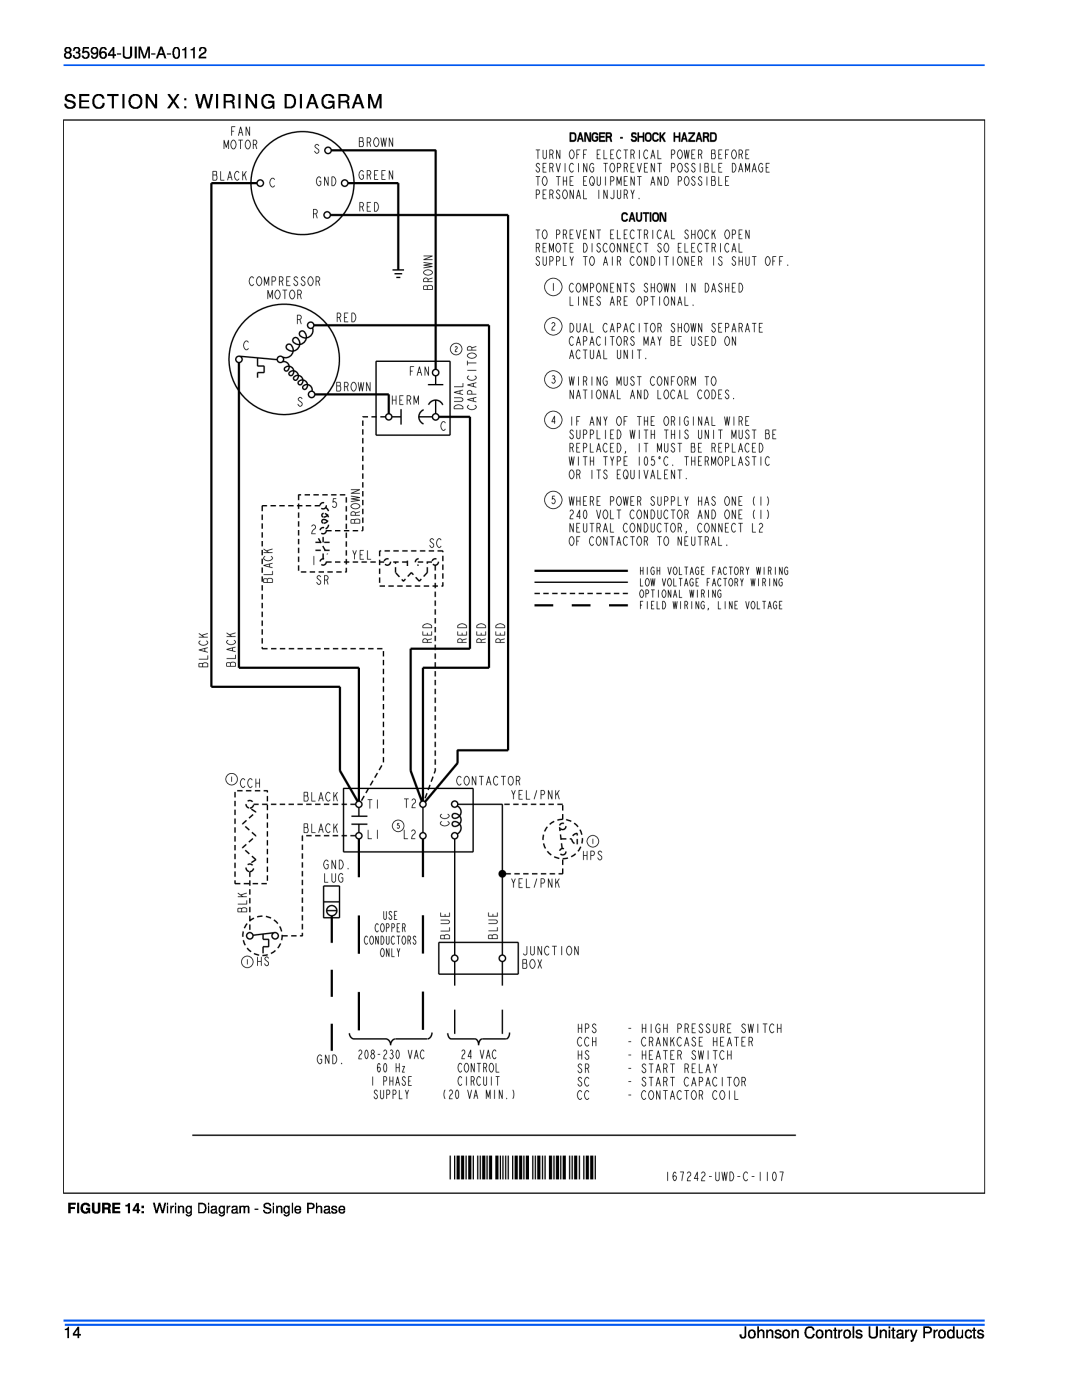 Johnson Controls R-410A installation manual 167242, Section X Wiring Diagram, UIM-A-0112, Wiring Diagram - Single Phase 